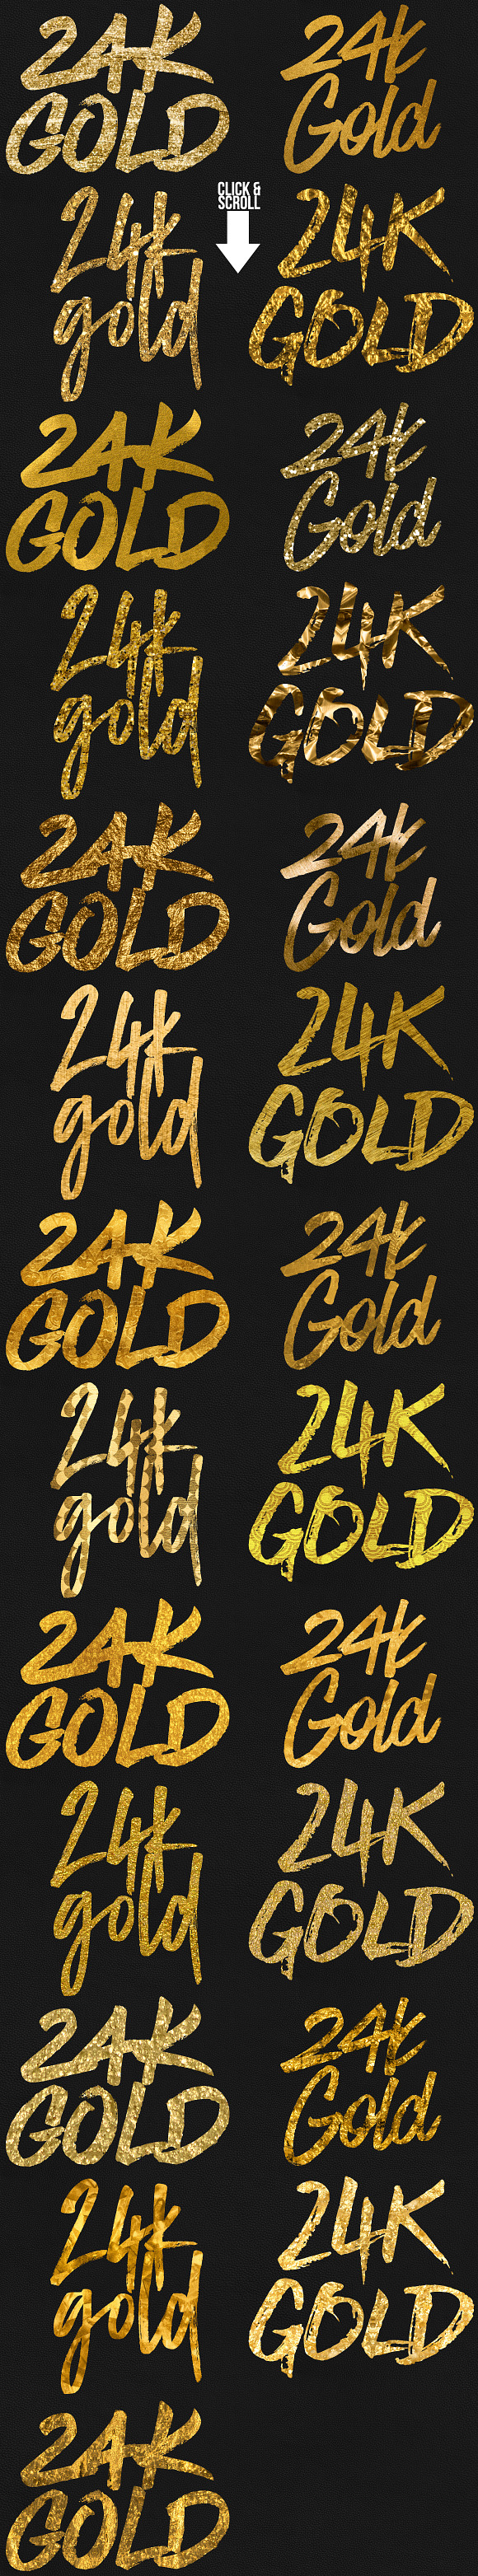 500 Gold Foil Layer Styles Photoshop in Photoshop Layer Styles - product preview 3